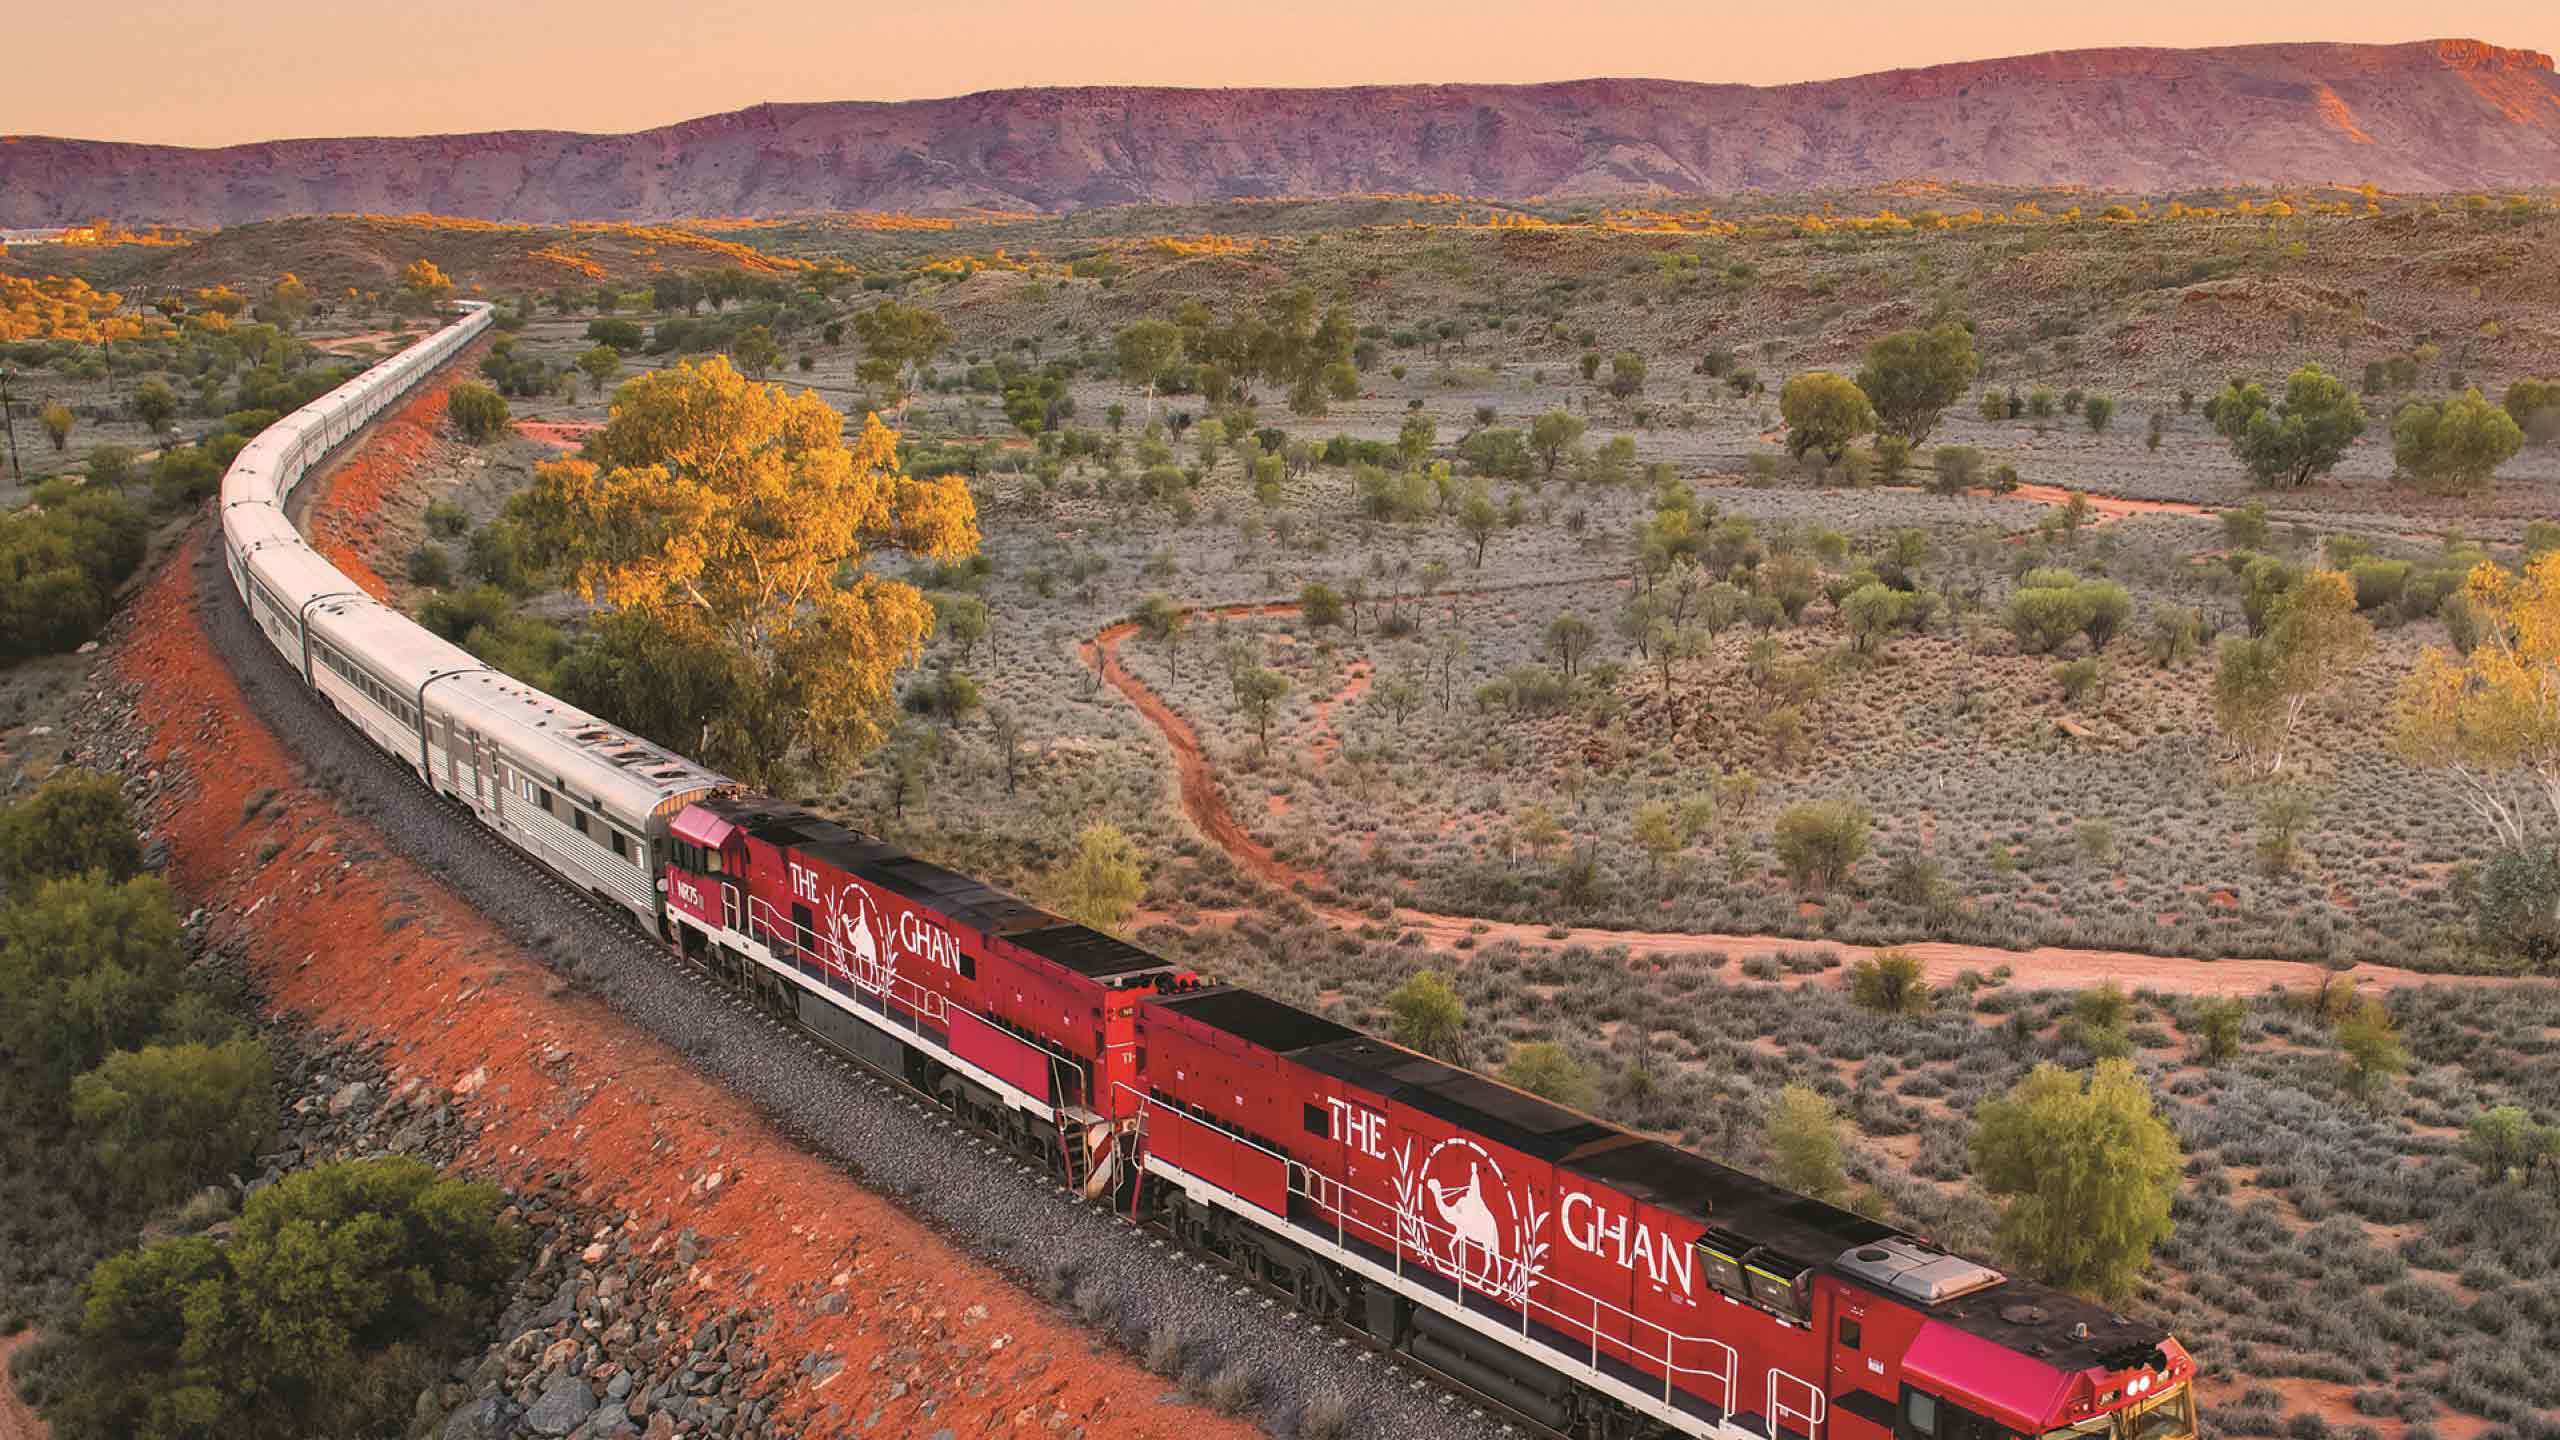 “THE GHAN” Outback Rail Journey (Adelaide to Darwin) 3D2N